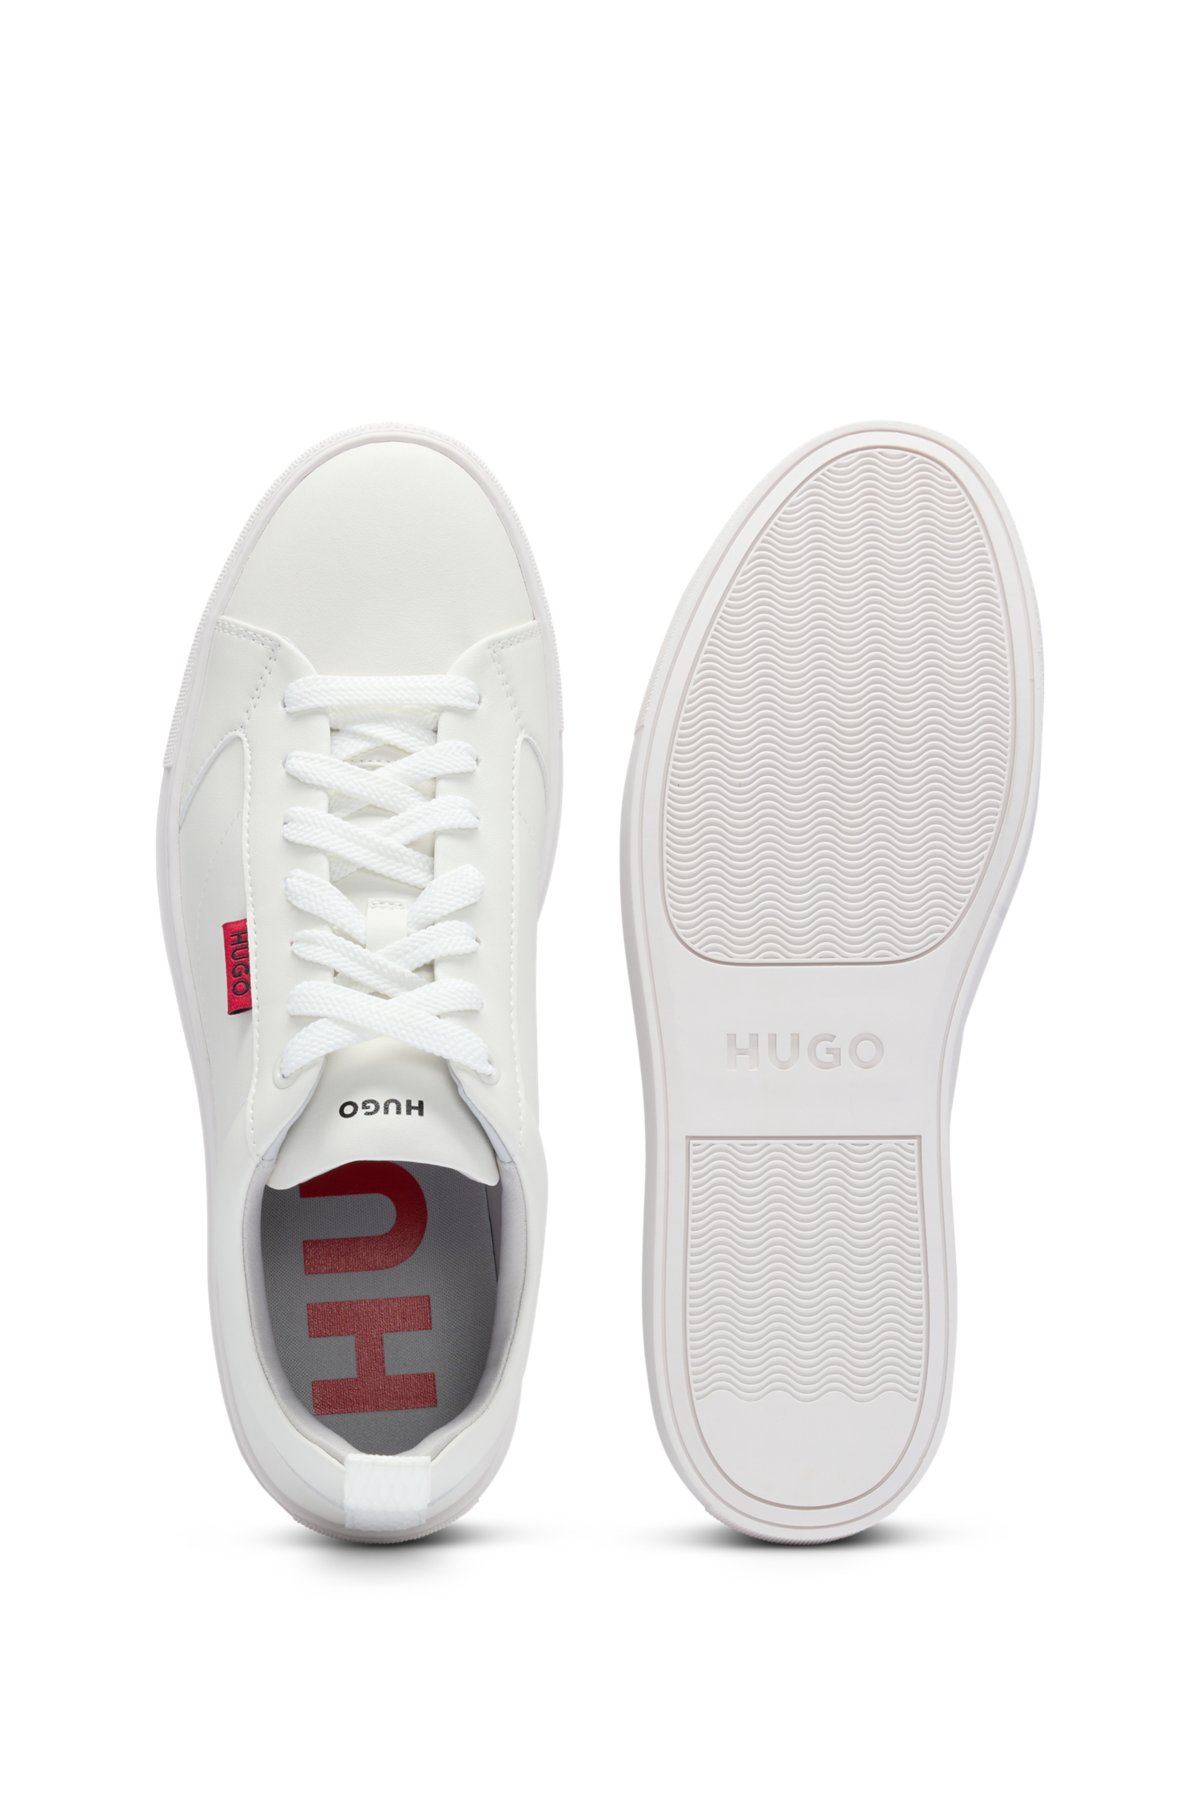 Cupsole trainers in faux leather with logo flag, White